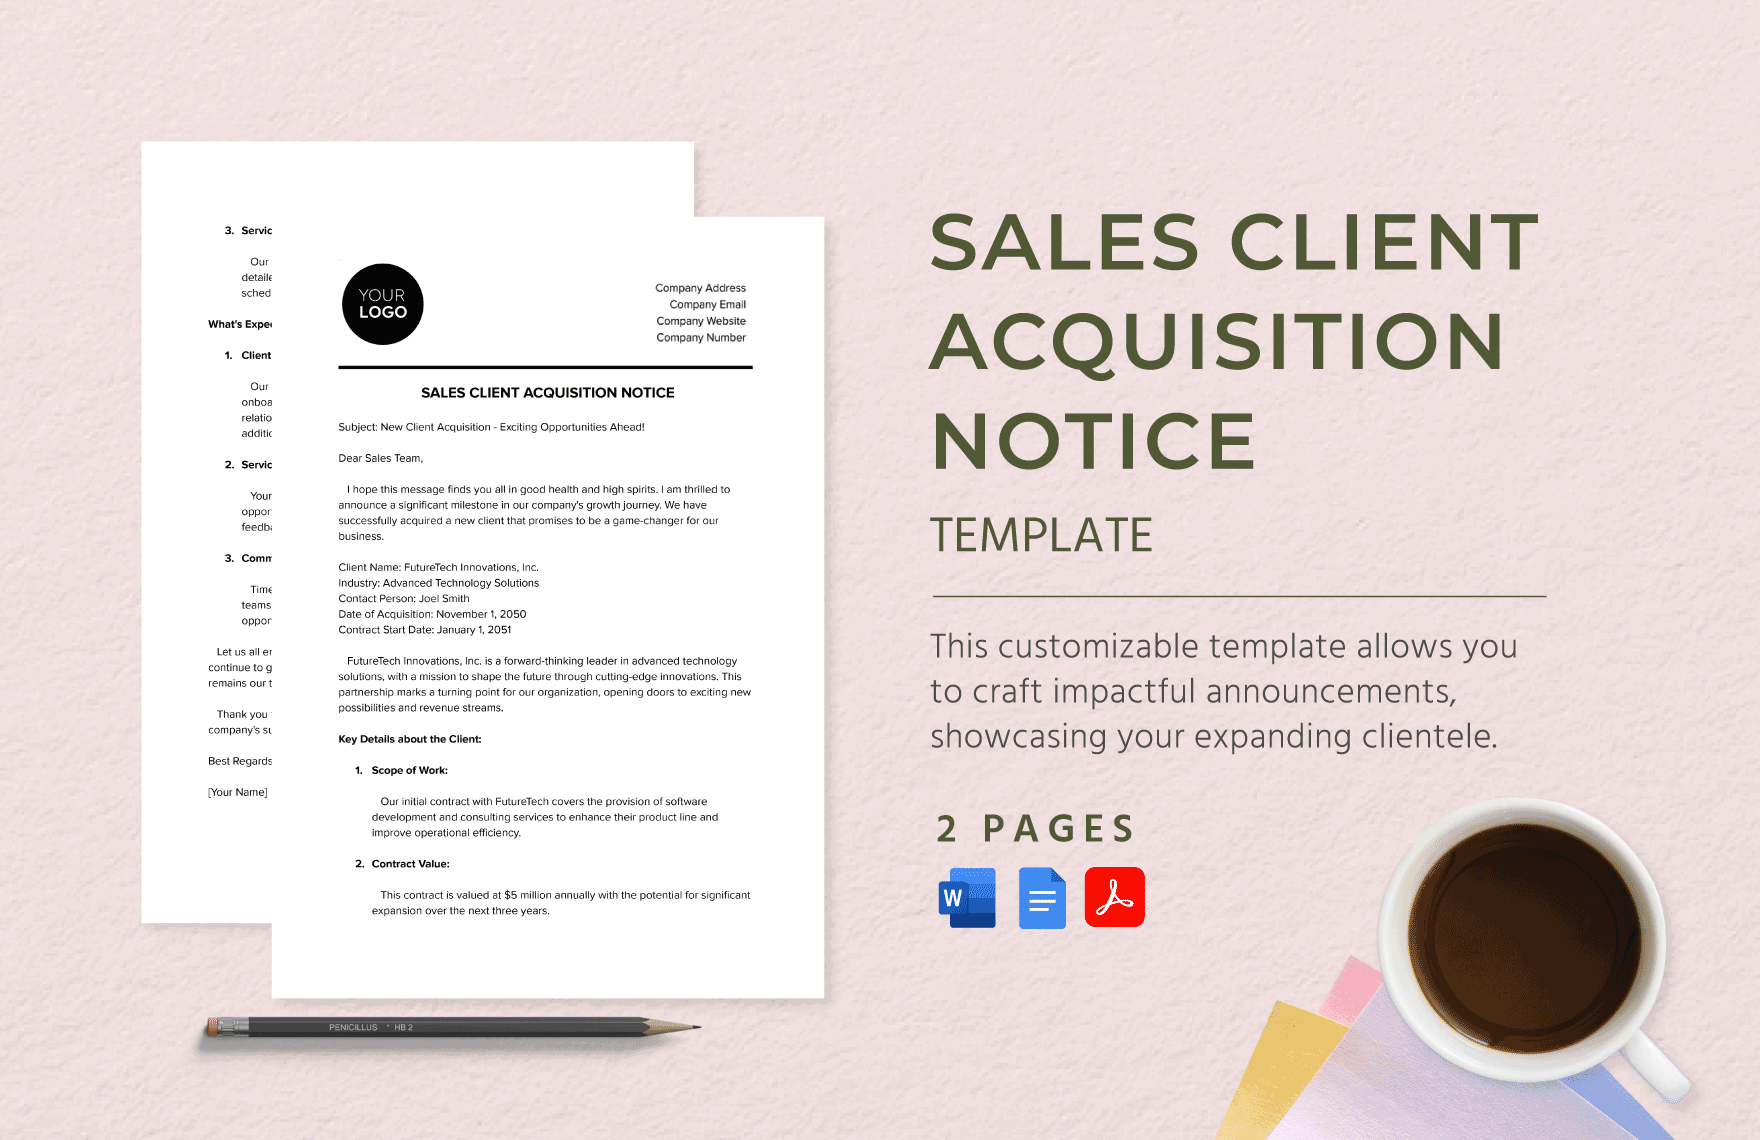 Sales Client Acquisition Notice Template in Word, Google Docs, PDF